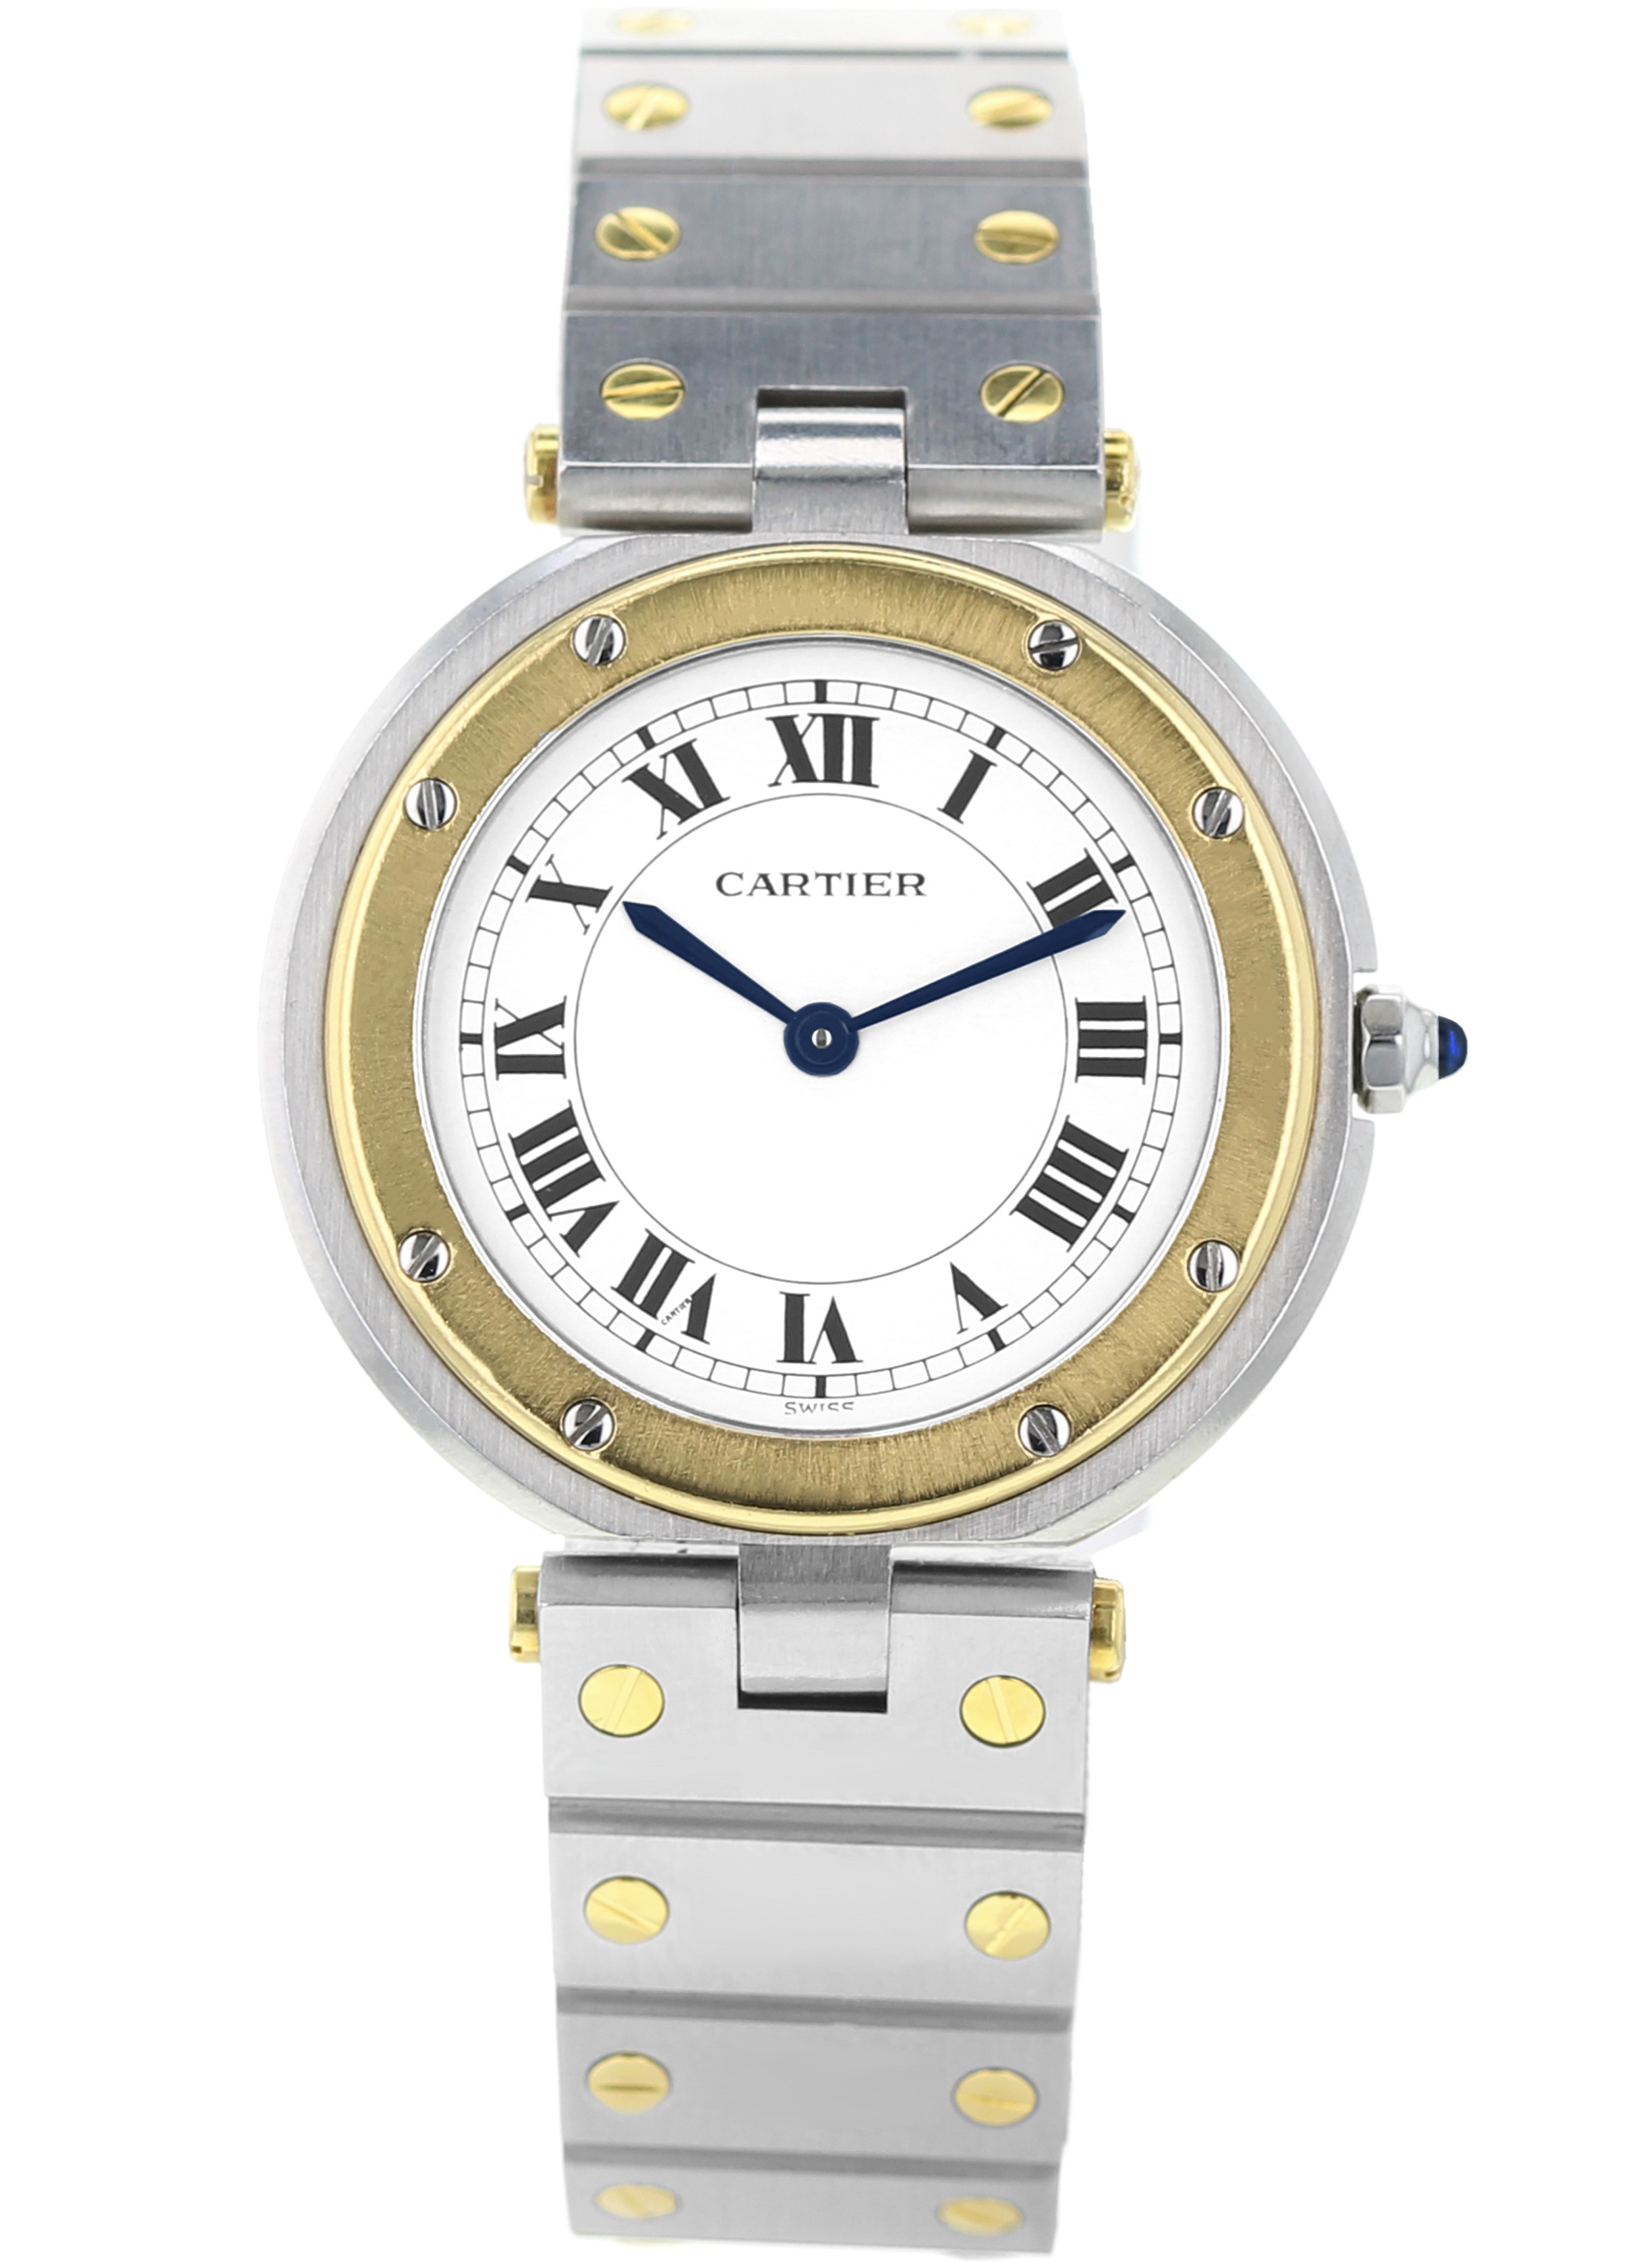 cartier year of manufacture